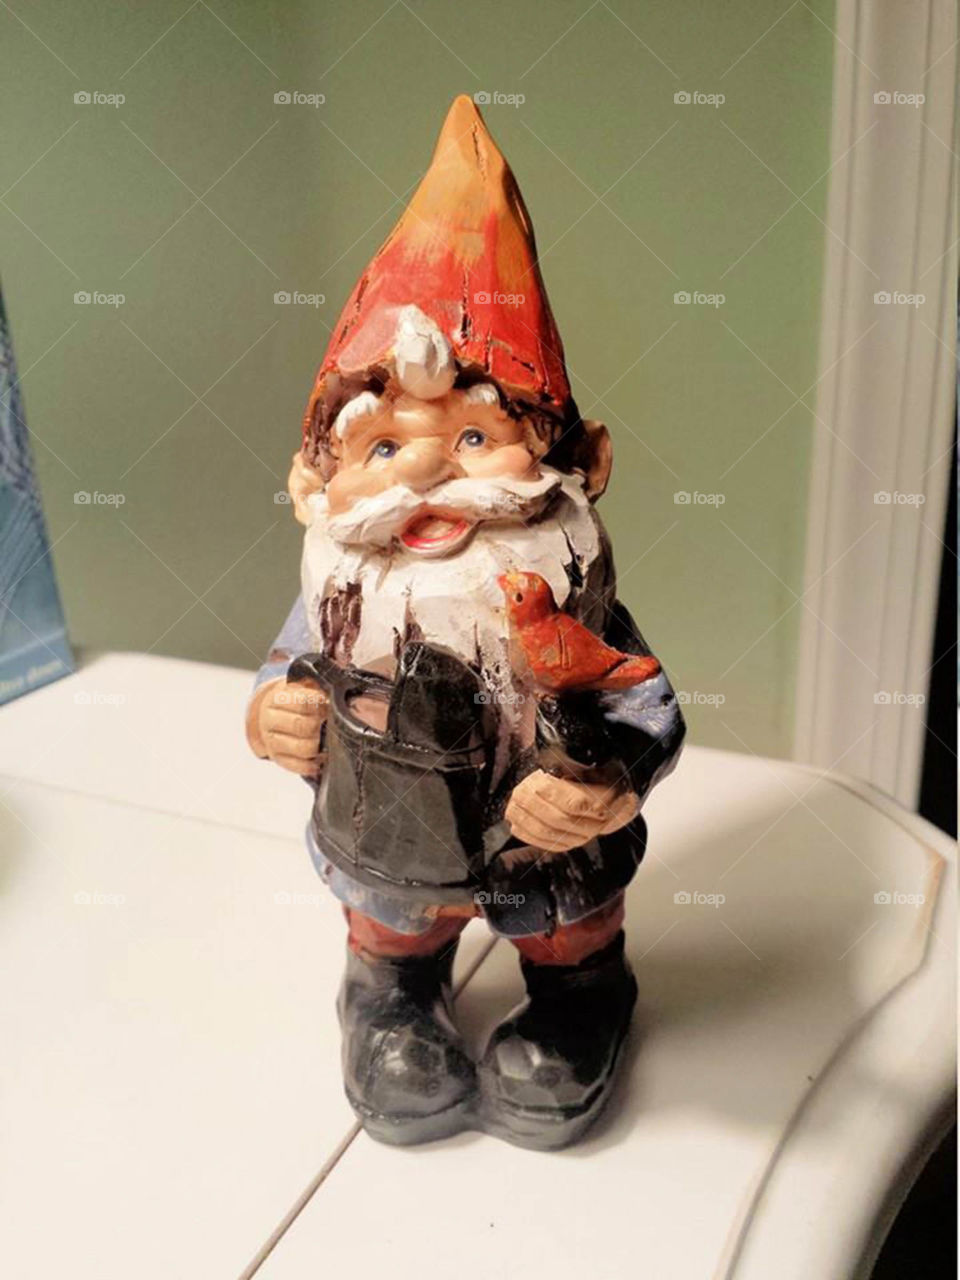 THE traveling gnome. My lucky gnome travels with me everywhere